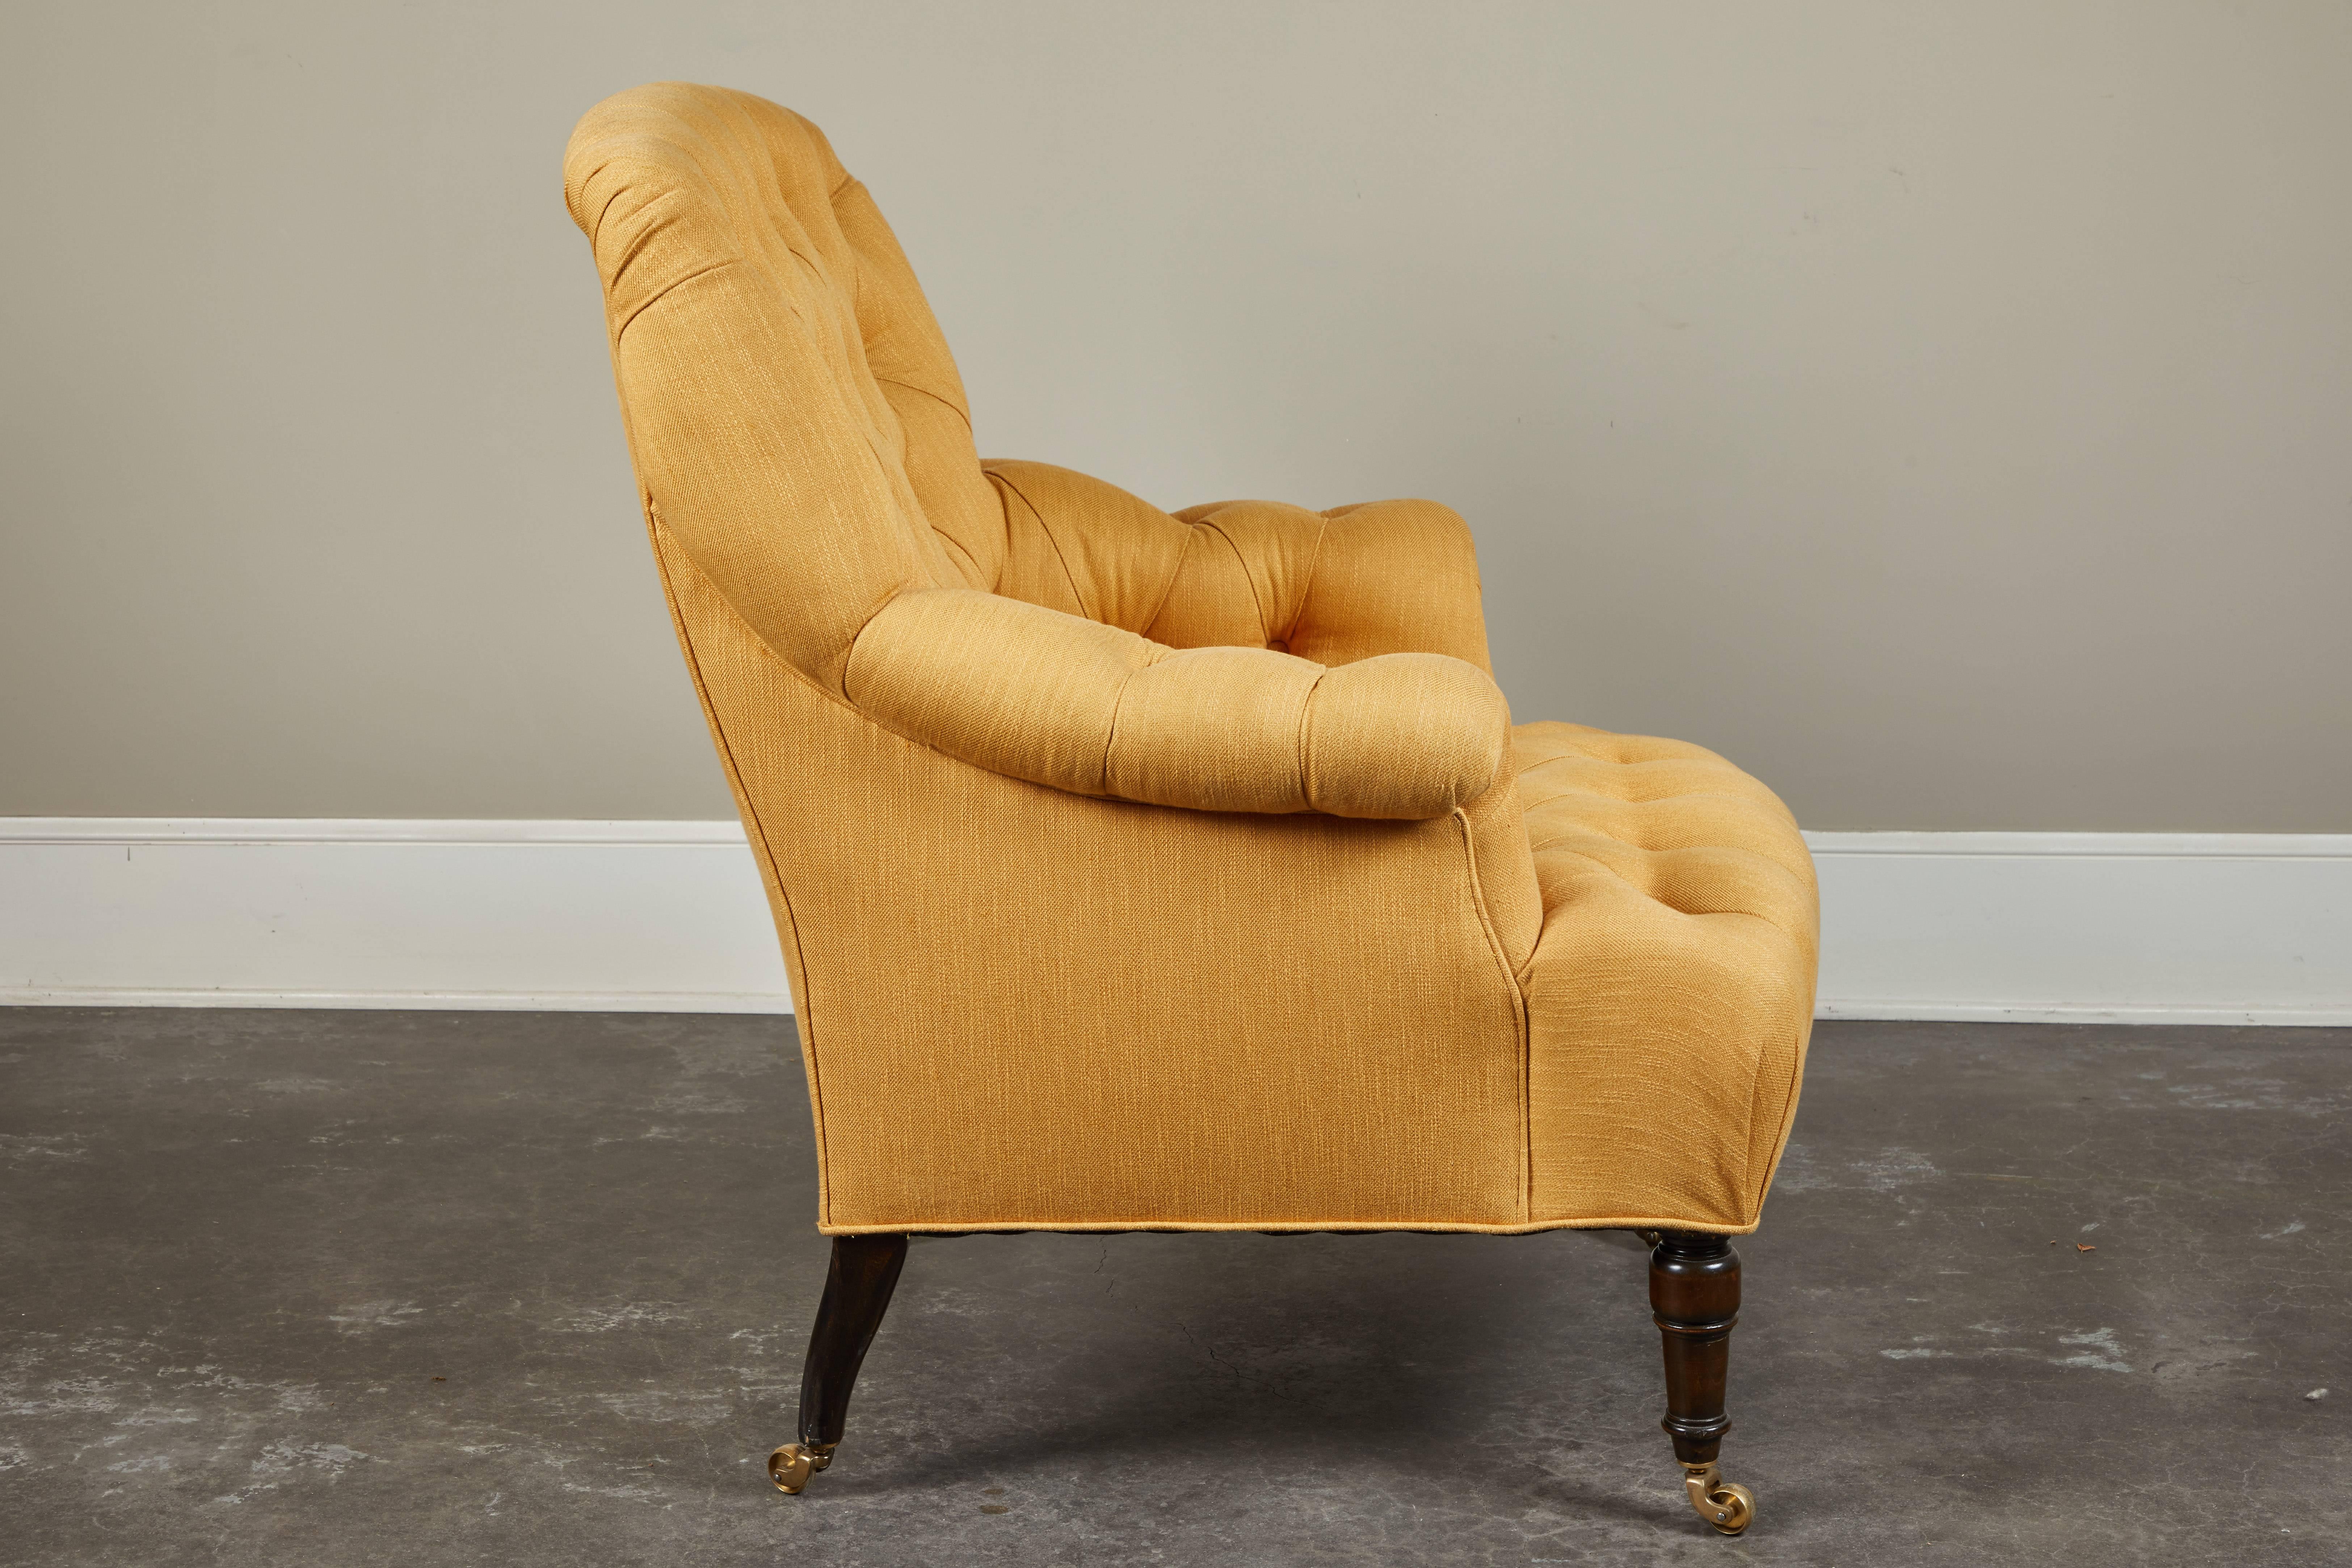 Regency Tufted Upholstered Club Chair on Casters, Susanne Hollis Collection